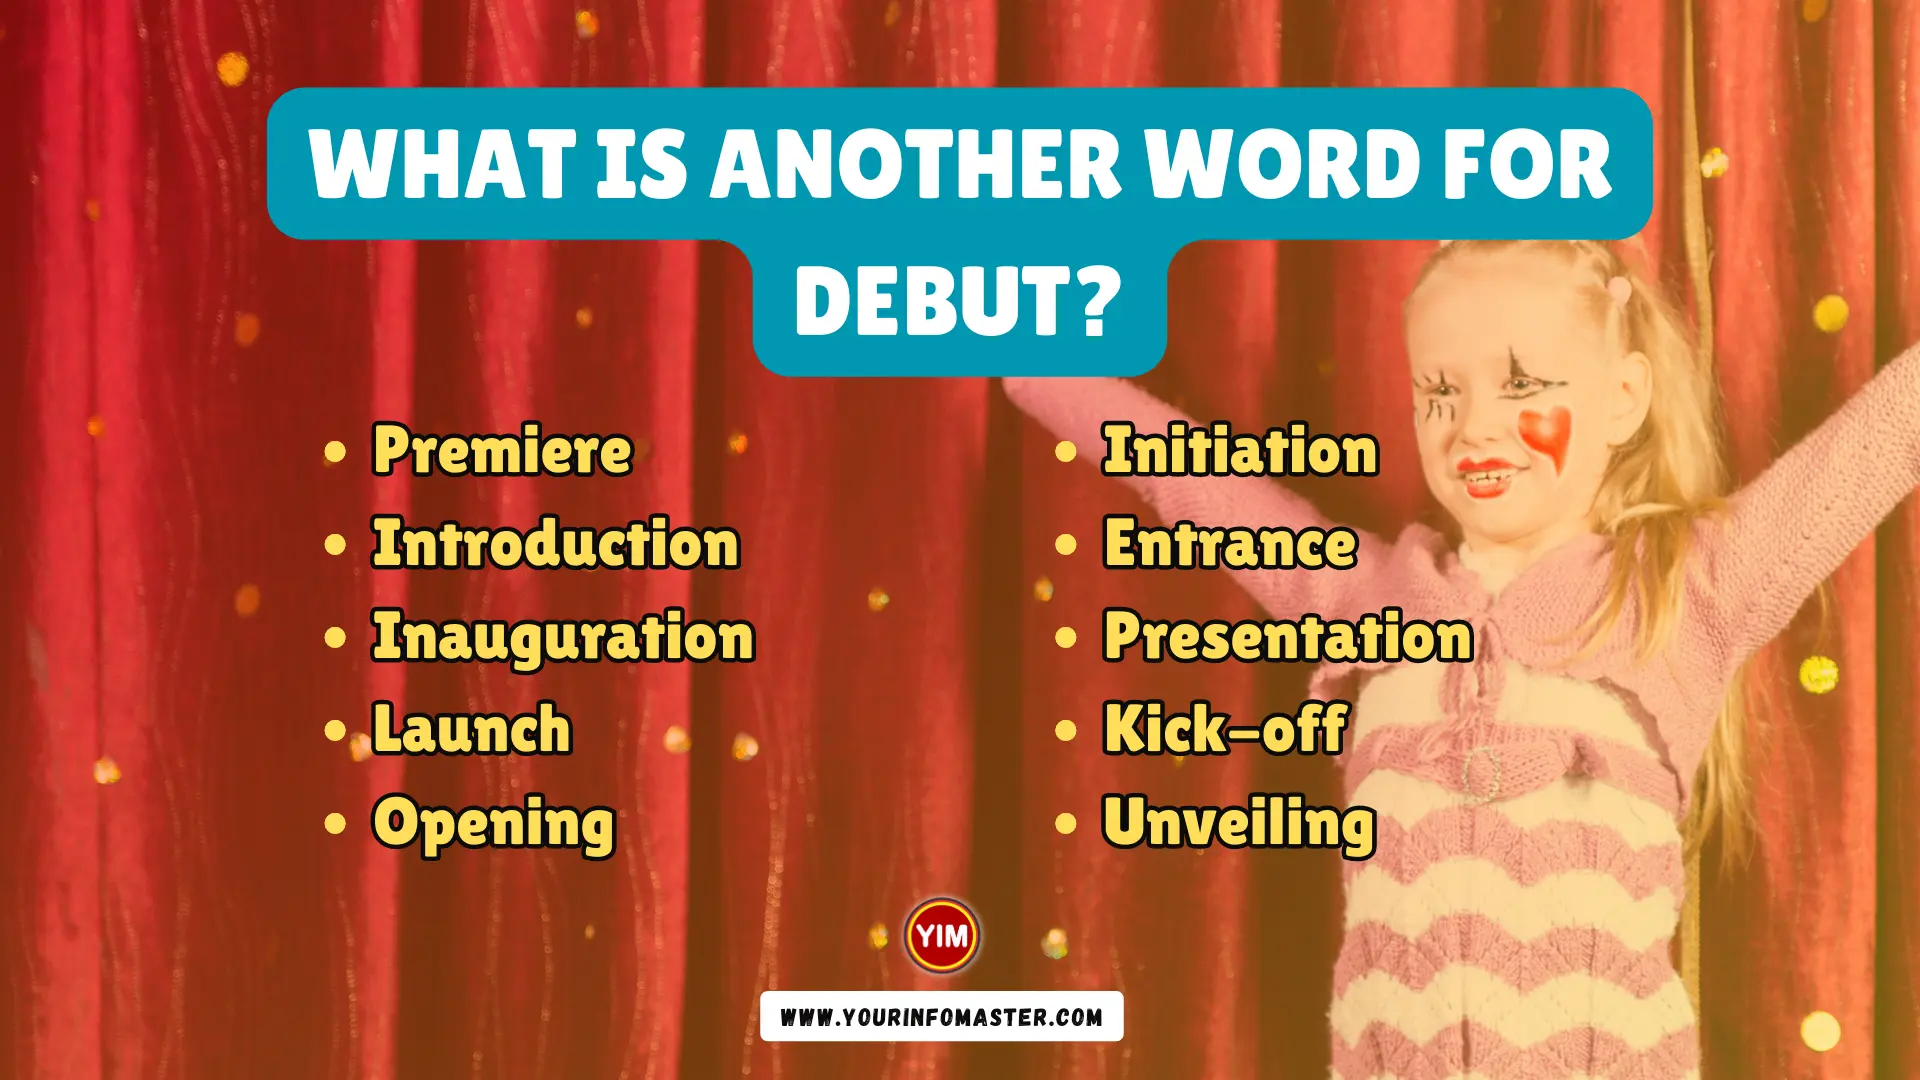 What is another word for Debut